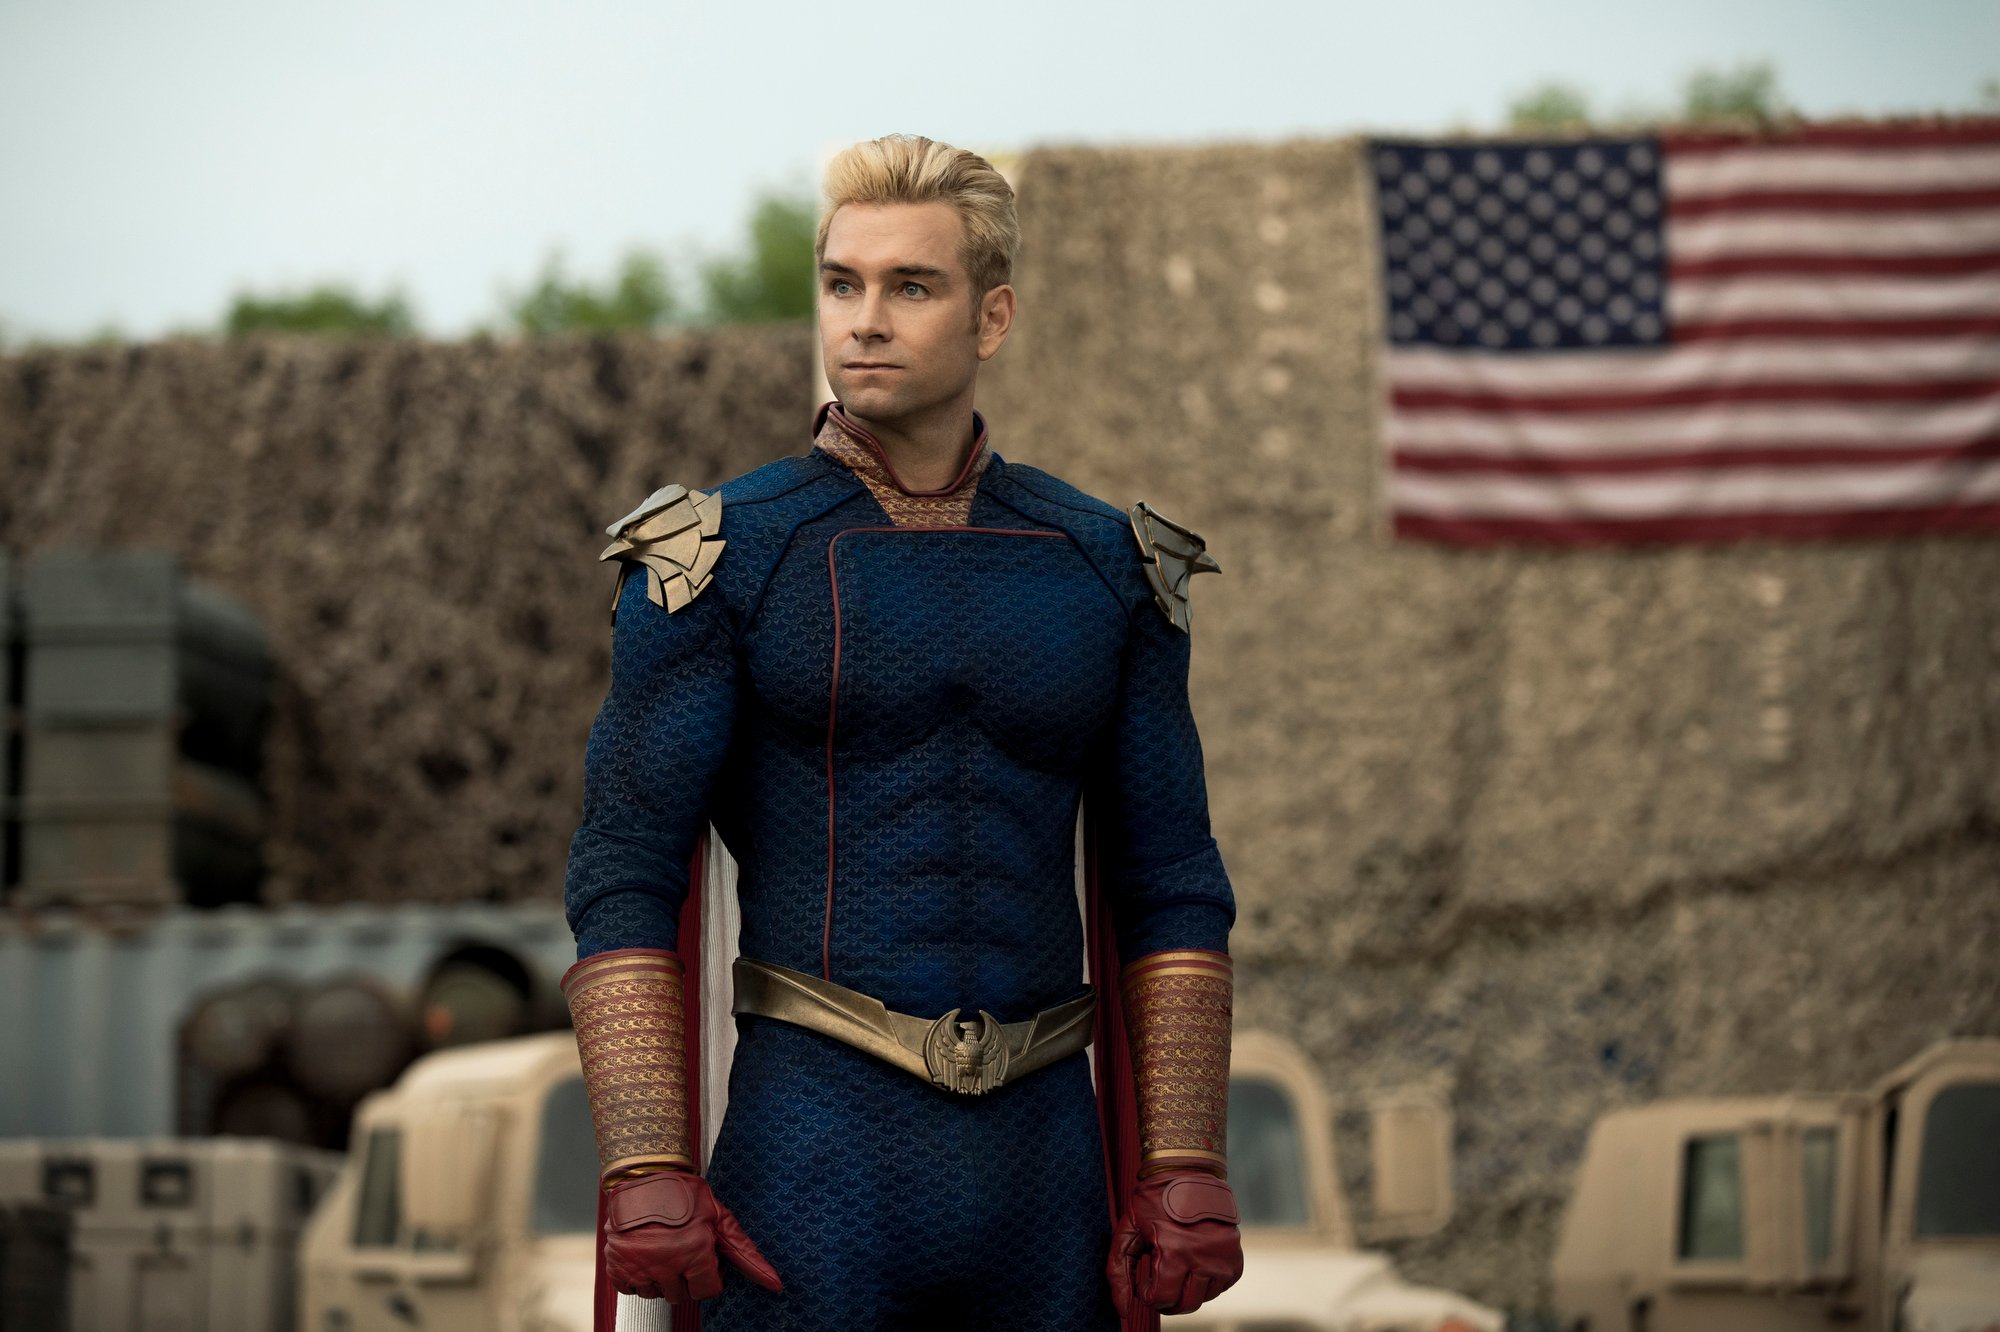 Antony Starr as Homelander in 'The Boys' Season 2. He's wearing a blue suit adorned with red and gold, and there's an American flag in the background.